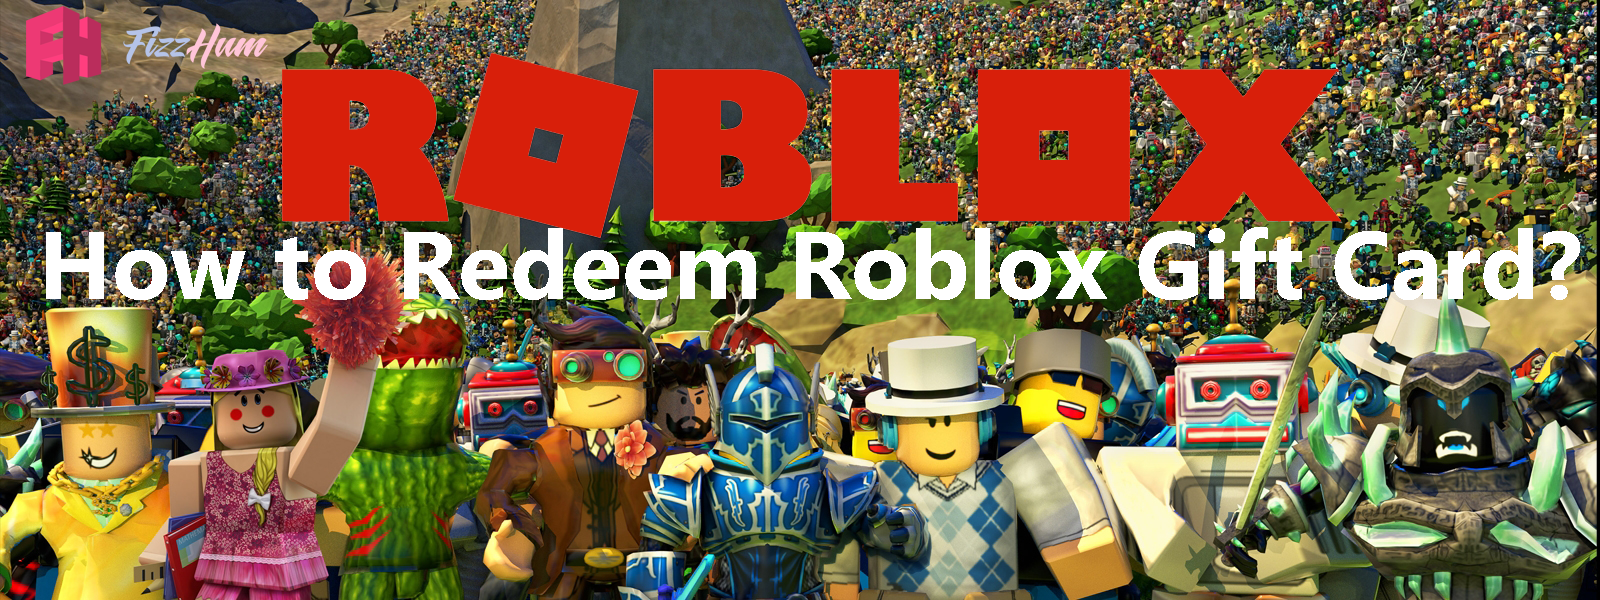 How To Redeem Roblox Gift Card Step By Step 2021 Fizzhum Com - roblox disable reset button